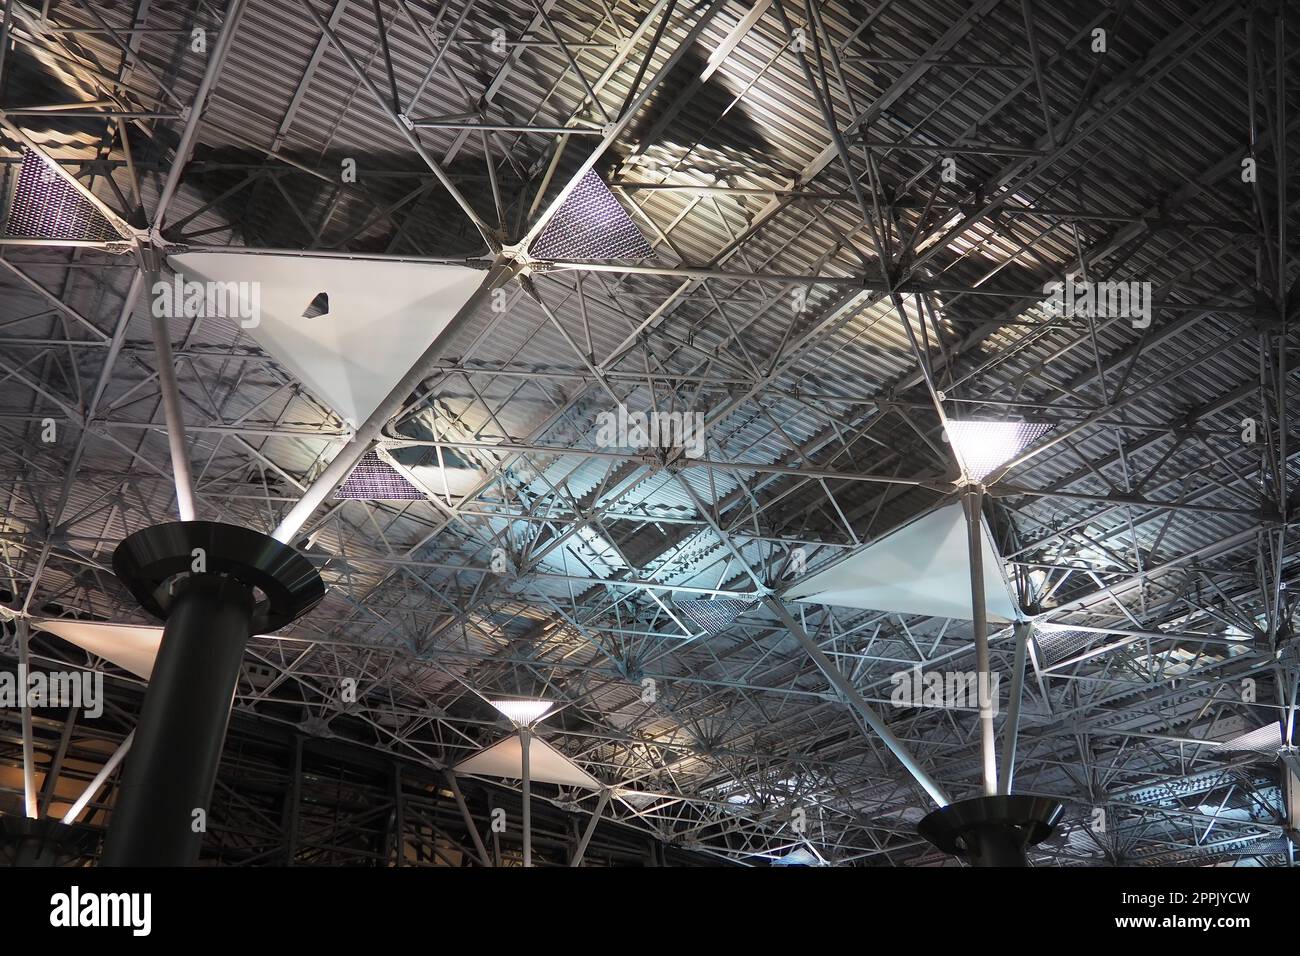 Metal structures under the ceiling. Decorative details of the airport ceiling . Concrete beams, glass windows and metal elements as public building interior design. Abstract avant-garde architecture. Stock Photo